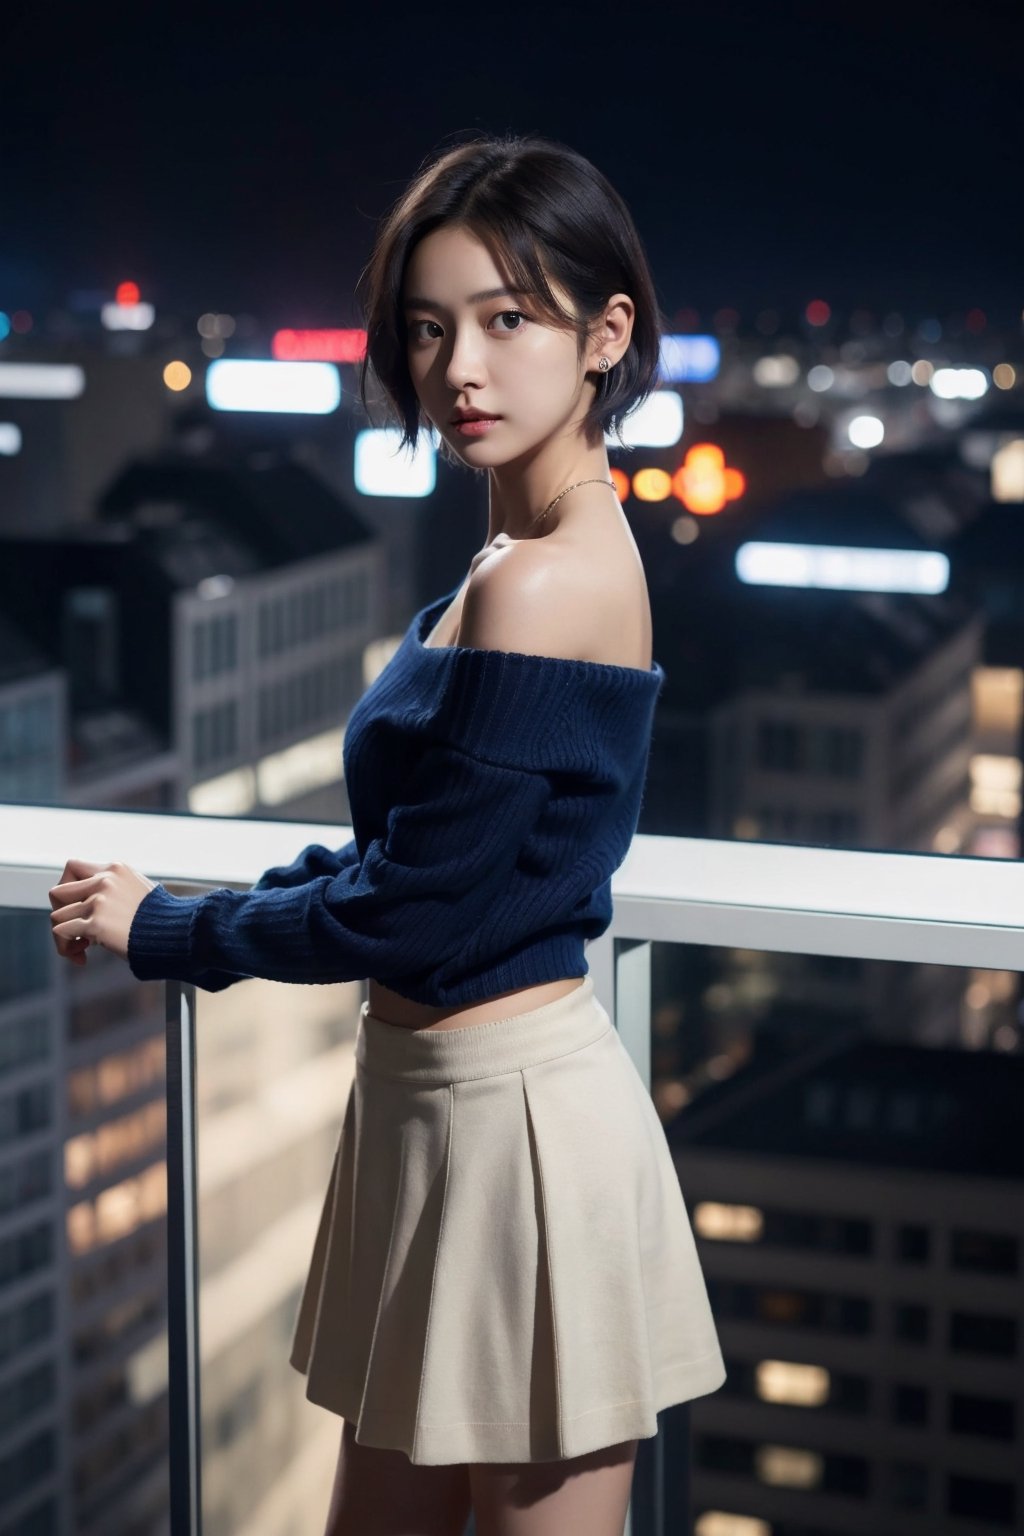 8K Cinema Reality, High resolution, high quality, A girl looking down at the city from a tall building on a dark night, Korean idol style, Full-body shot, small hands, a little pretty hands, small natural five little finger, short hair up, see blue_eyes, red color sweater with a Open shoulder, mini skirt, bright white skin,